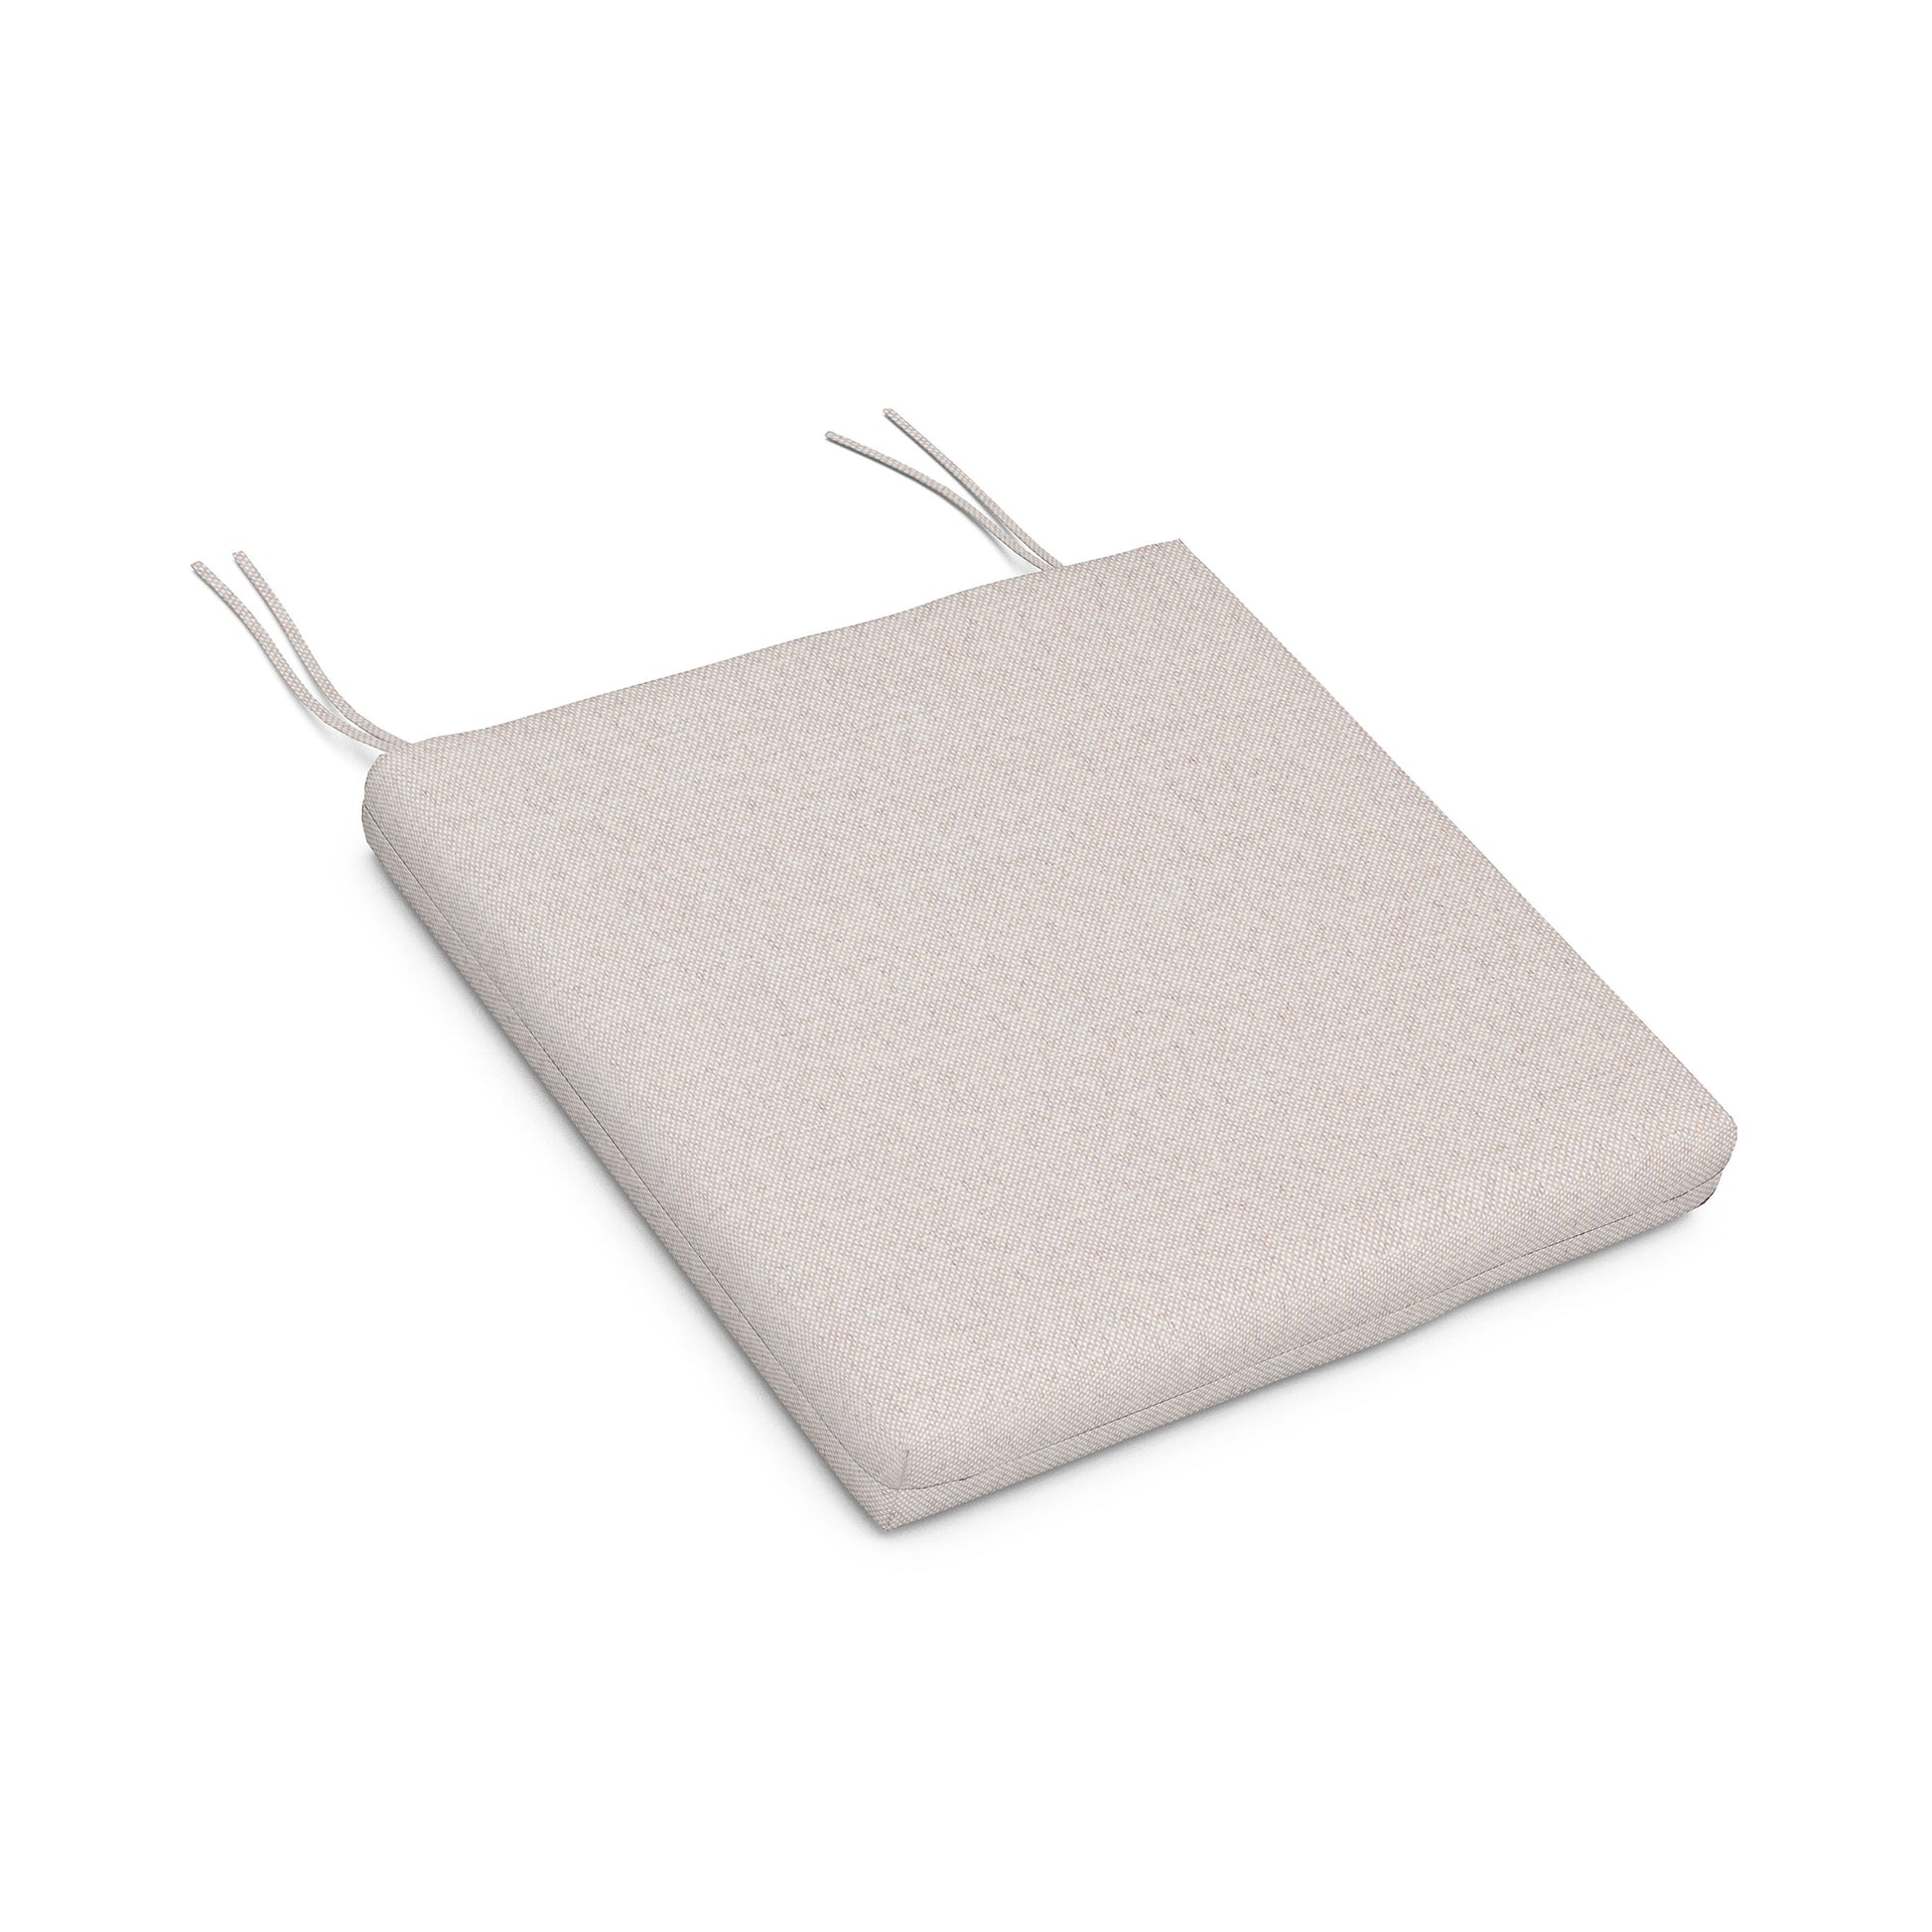 A light gray POLYWOOD® XPWS0172 - Seat Cushion with fabric ties at each corner, isolated on a white background.